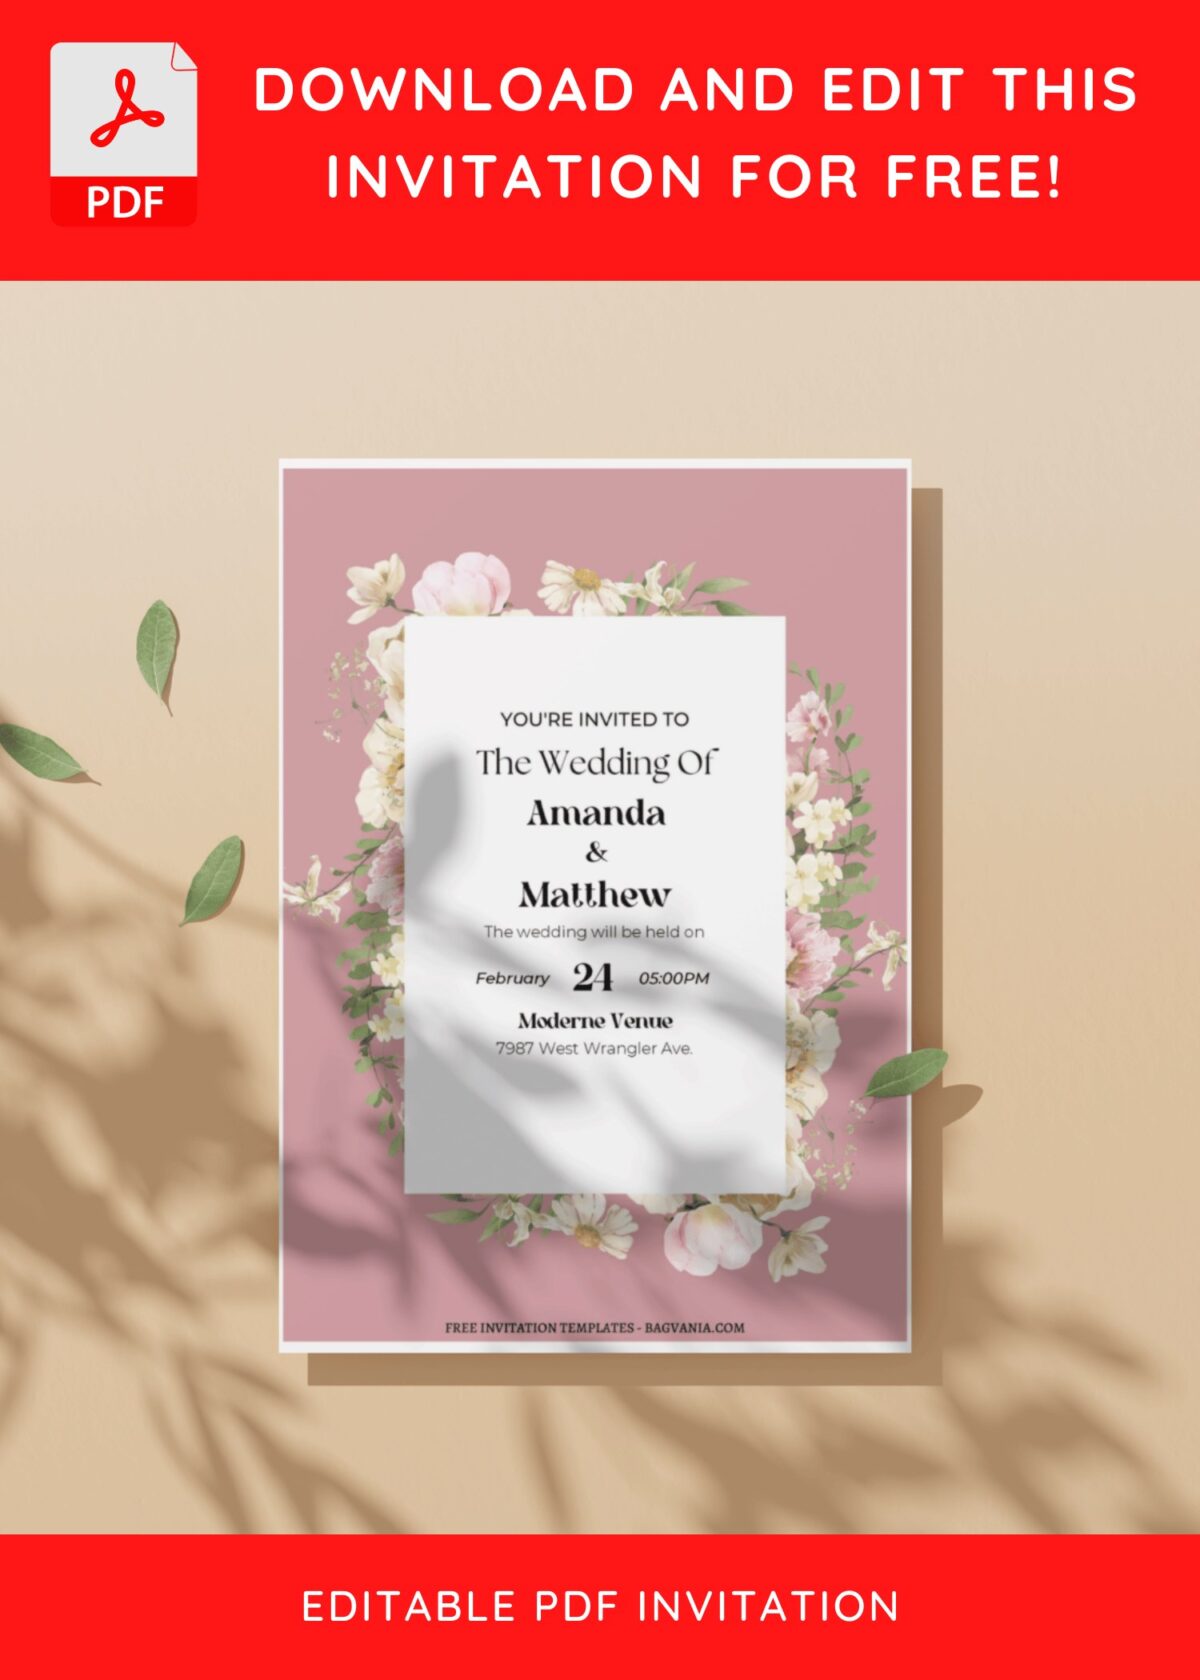 (Free Editable PDF) Pastel Floral Frame Wedding Invitation Templates with pastel pink background